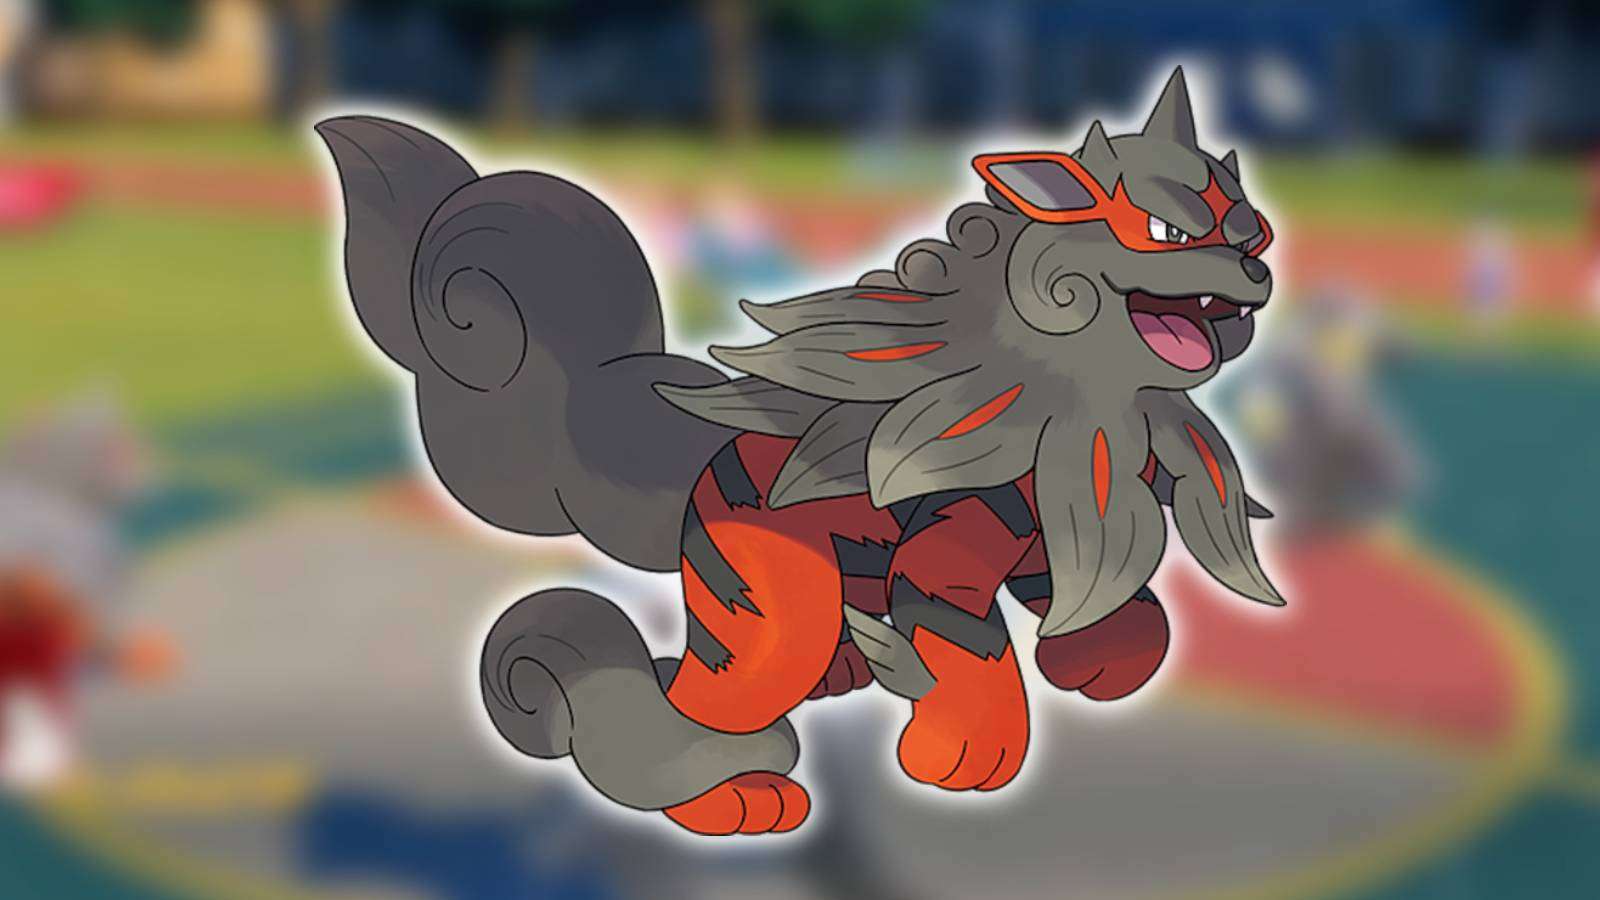 Hisuian Arcanine appears against a blurred background